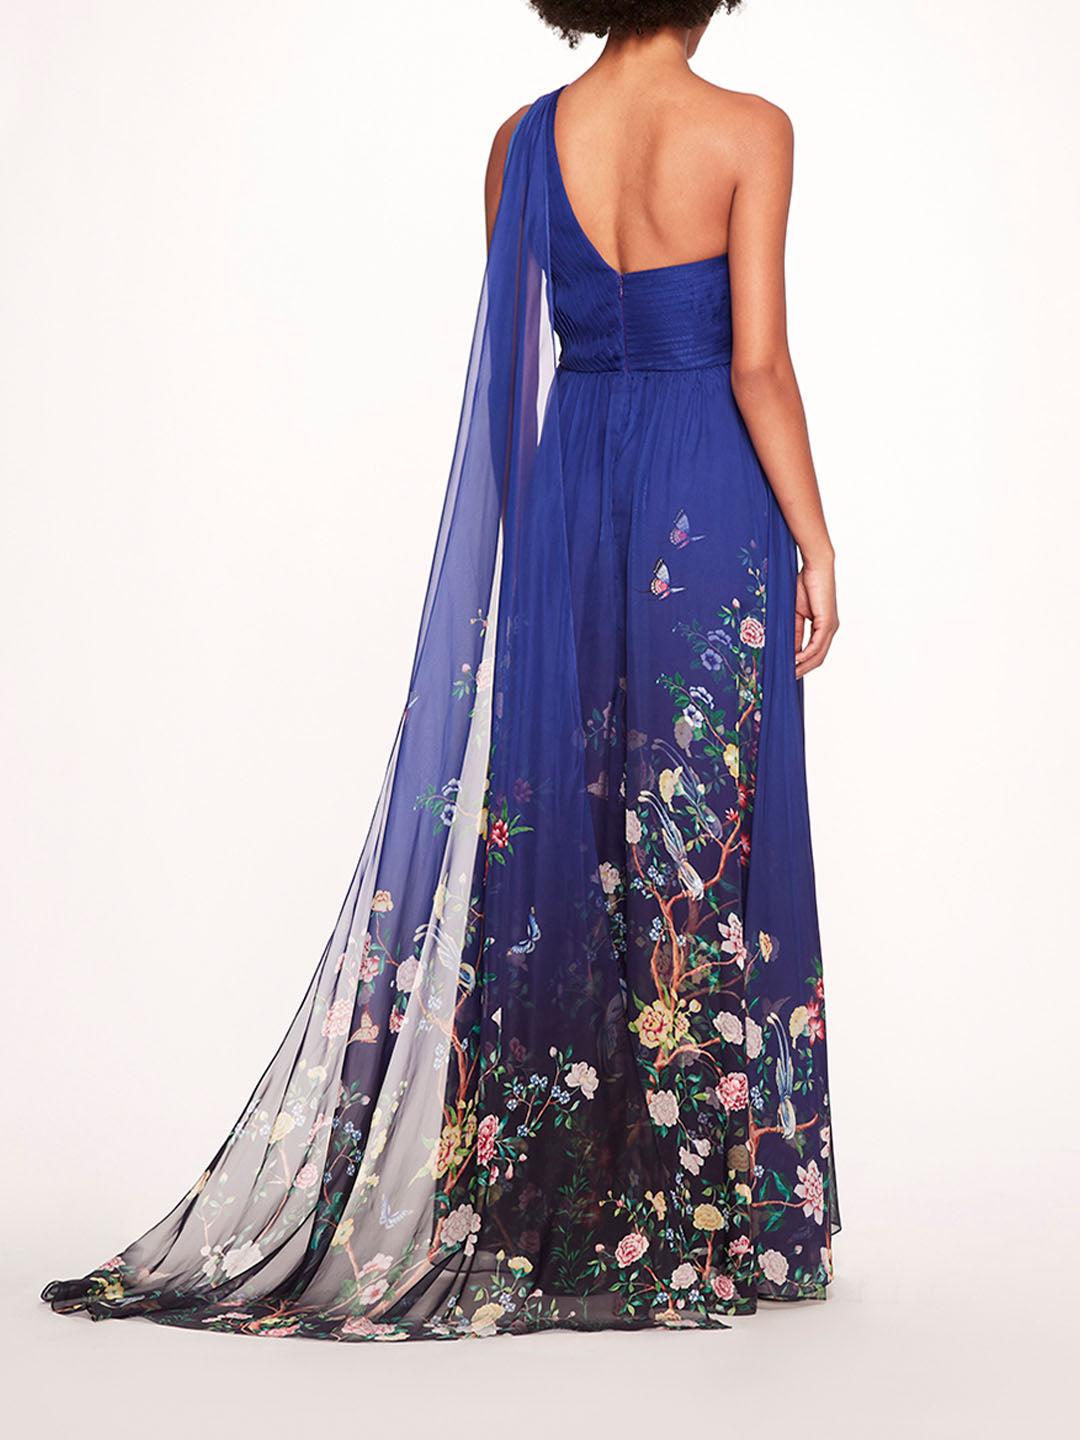 Marchesa Notte Lotus sequin-embellished gown - Purple